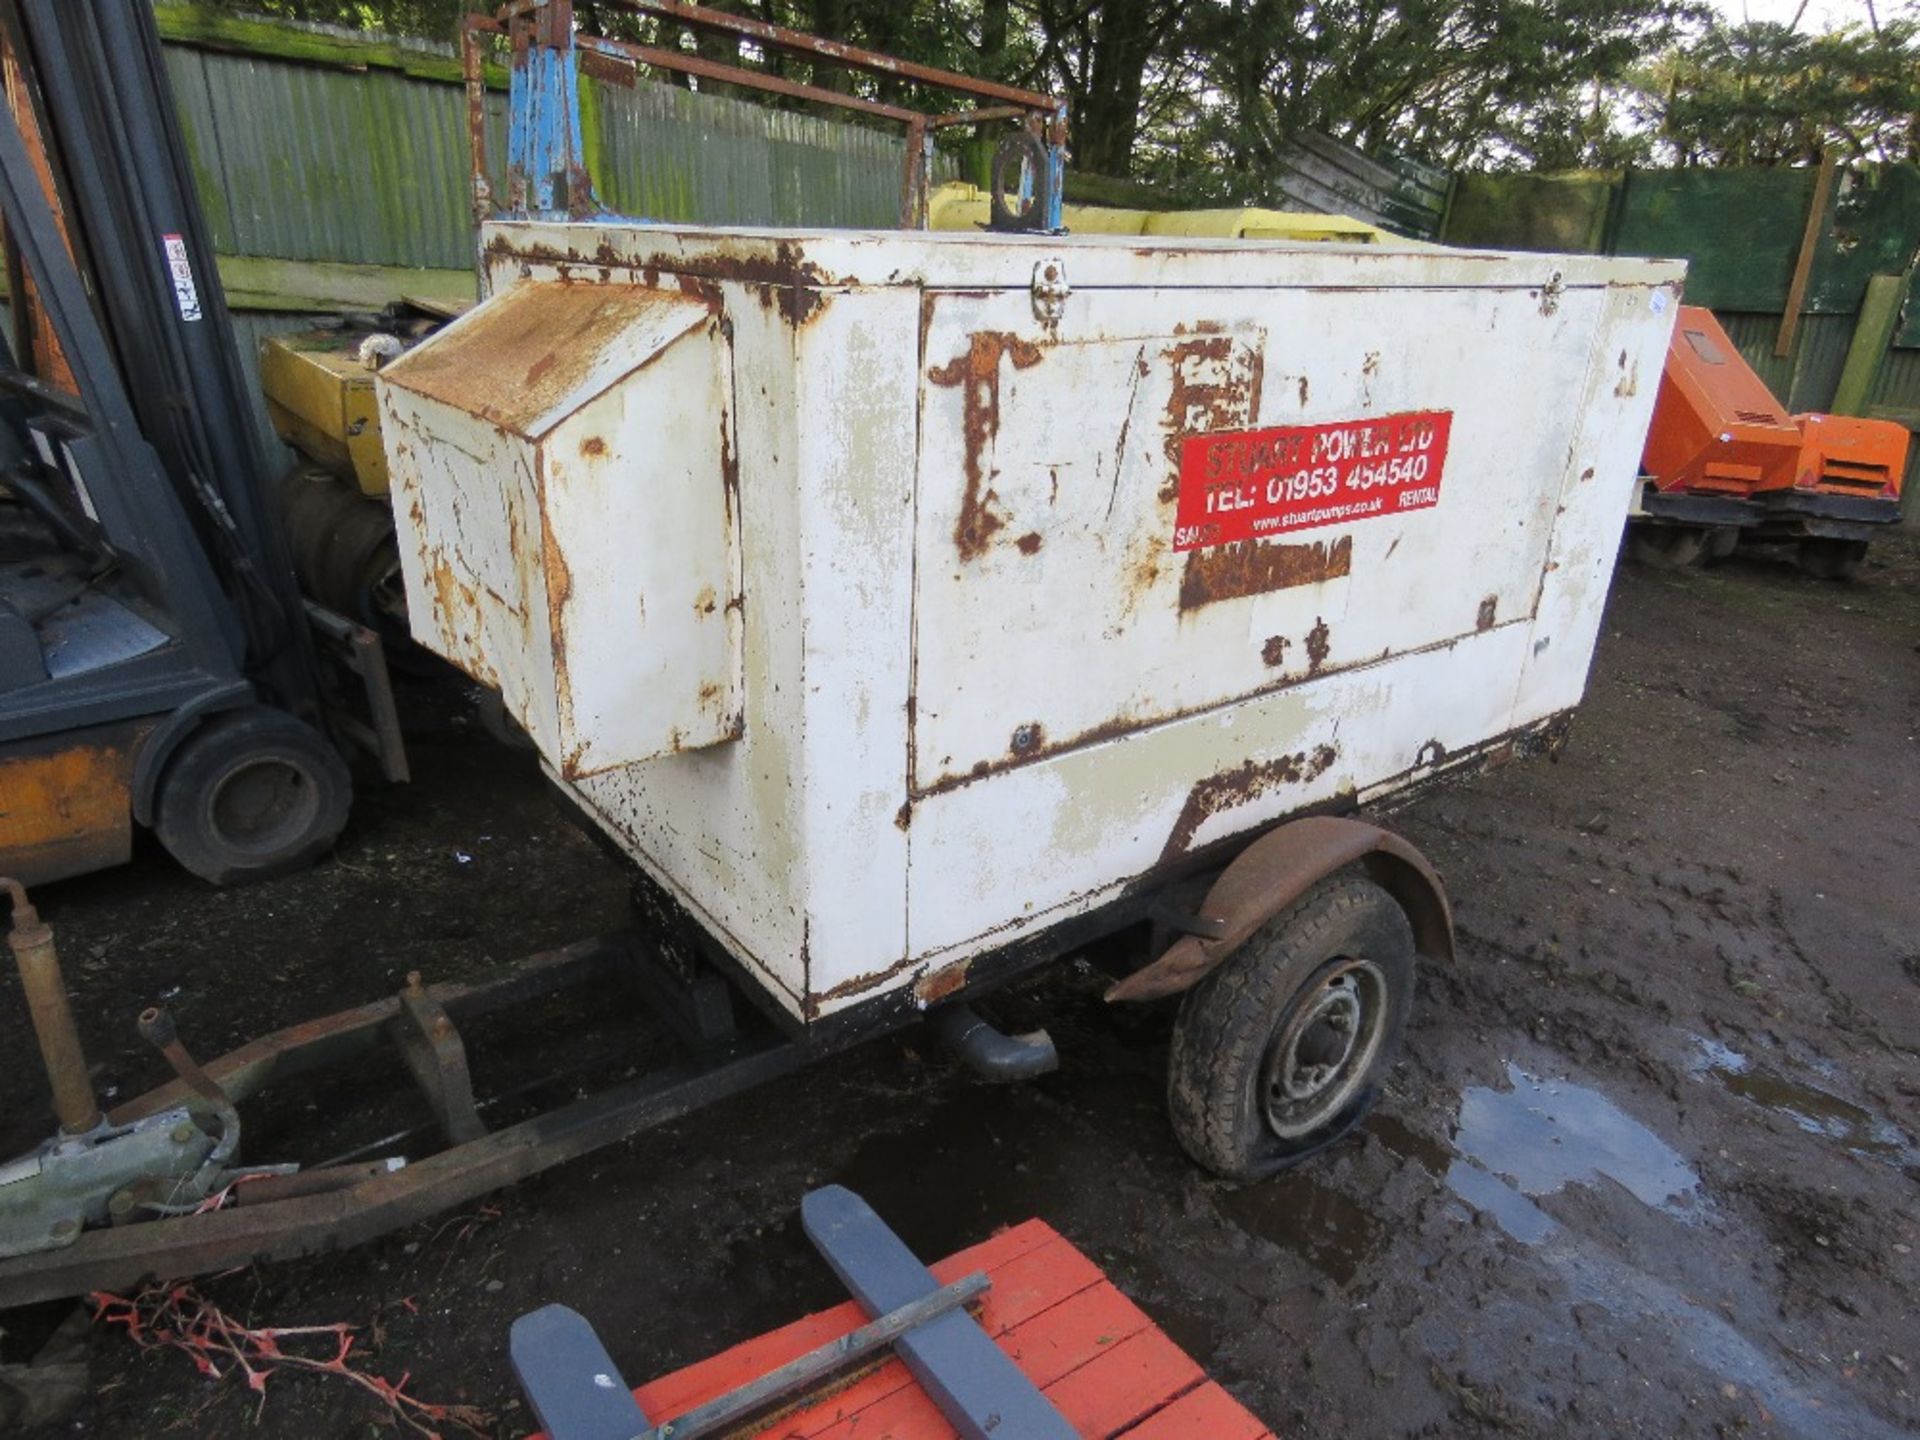 HATZ DIESEL ENGINED 20KVA TOWED GENERATOR SET, LEROY SOMER BACKEND FITTED. SOURCED FROM FARM CLOSURE